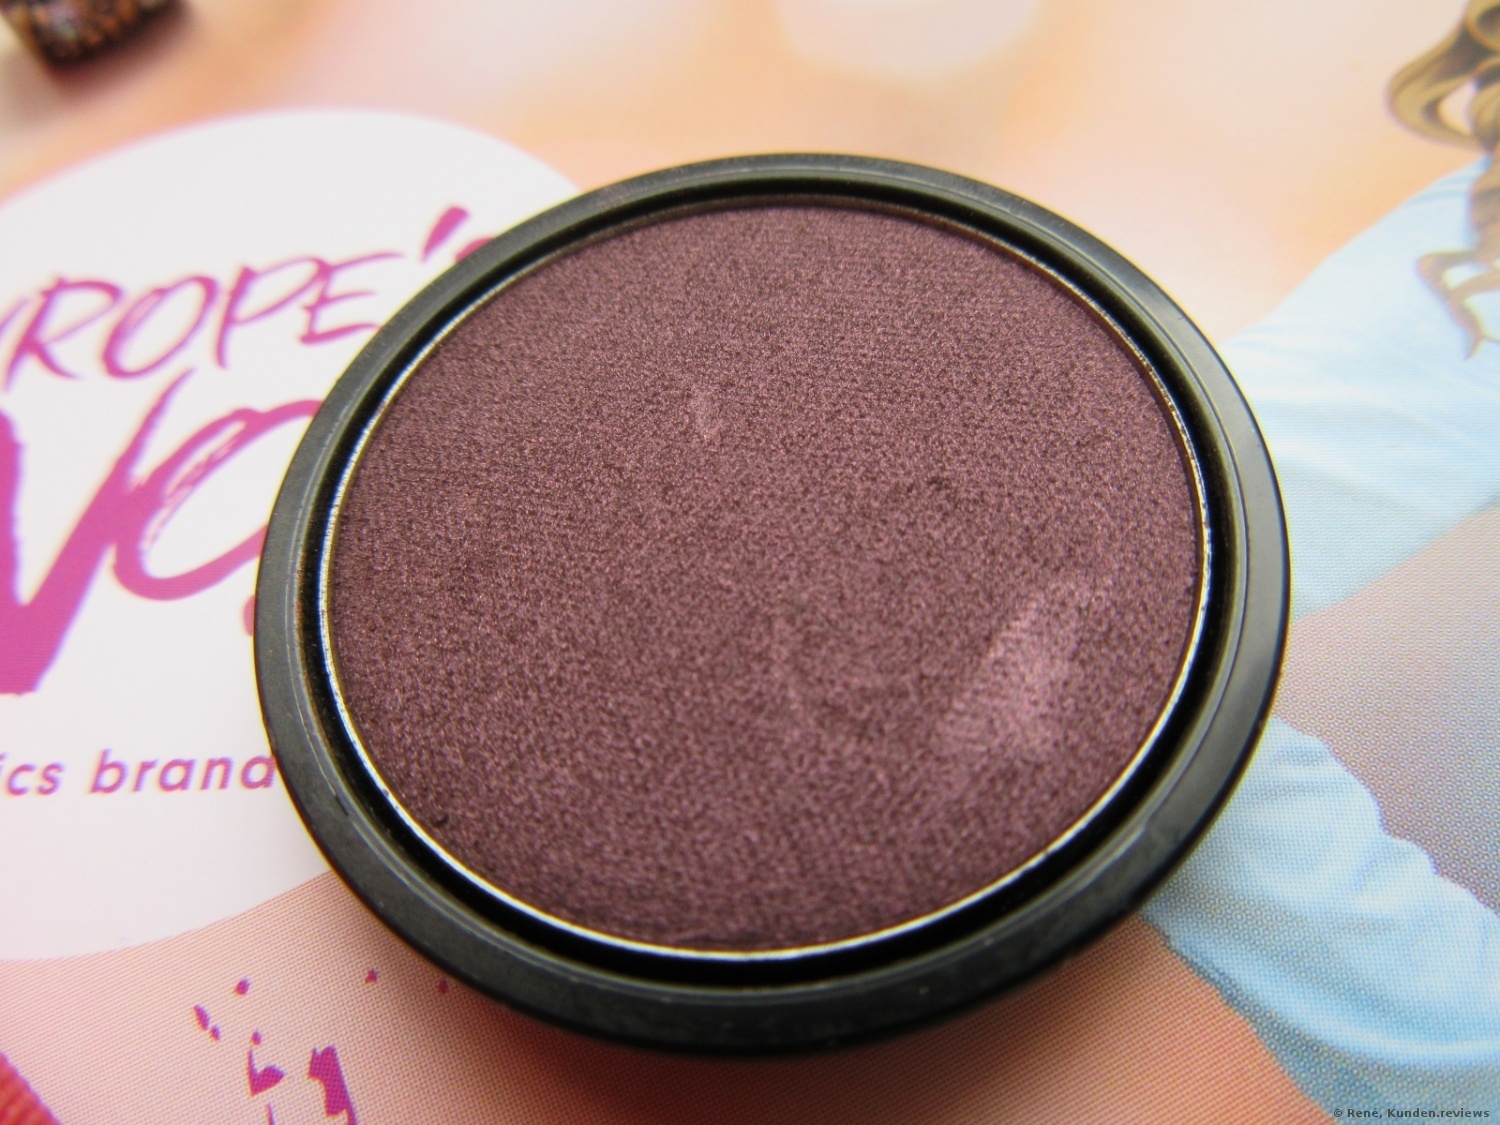  essence My Must Haves Eyeshadow # 18 black as a berry